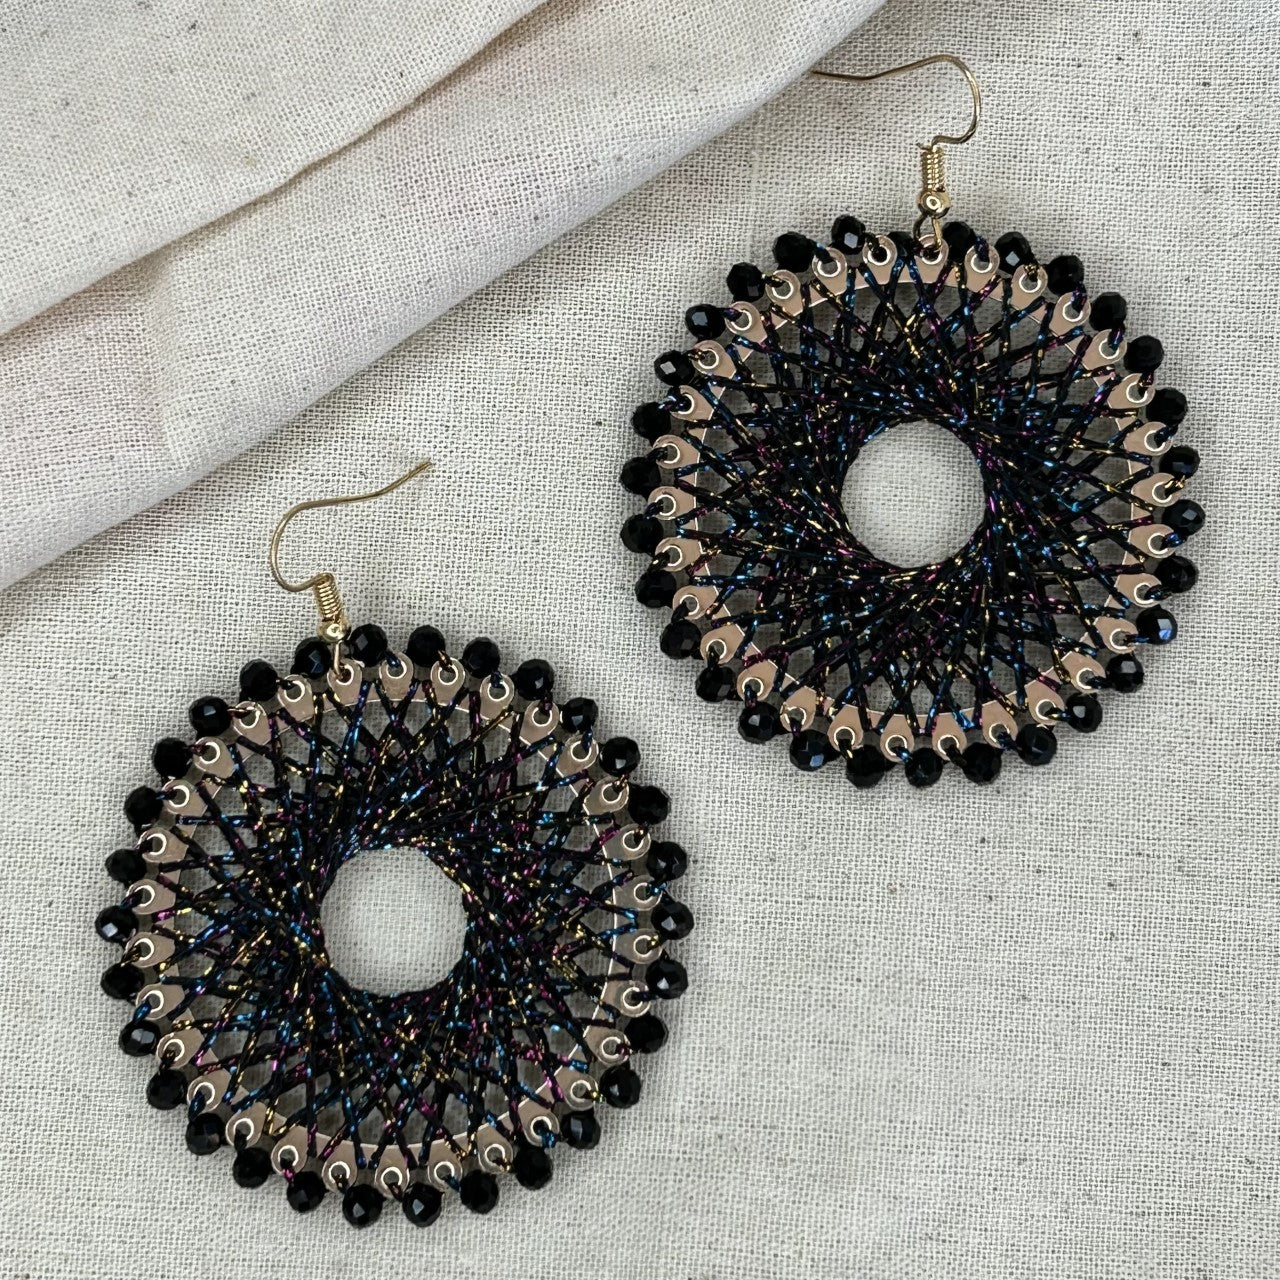 Angelco Accessories colour burst circle earrings on linen background - black colourful